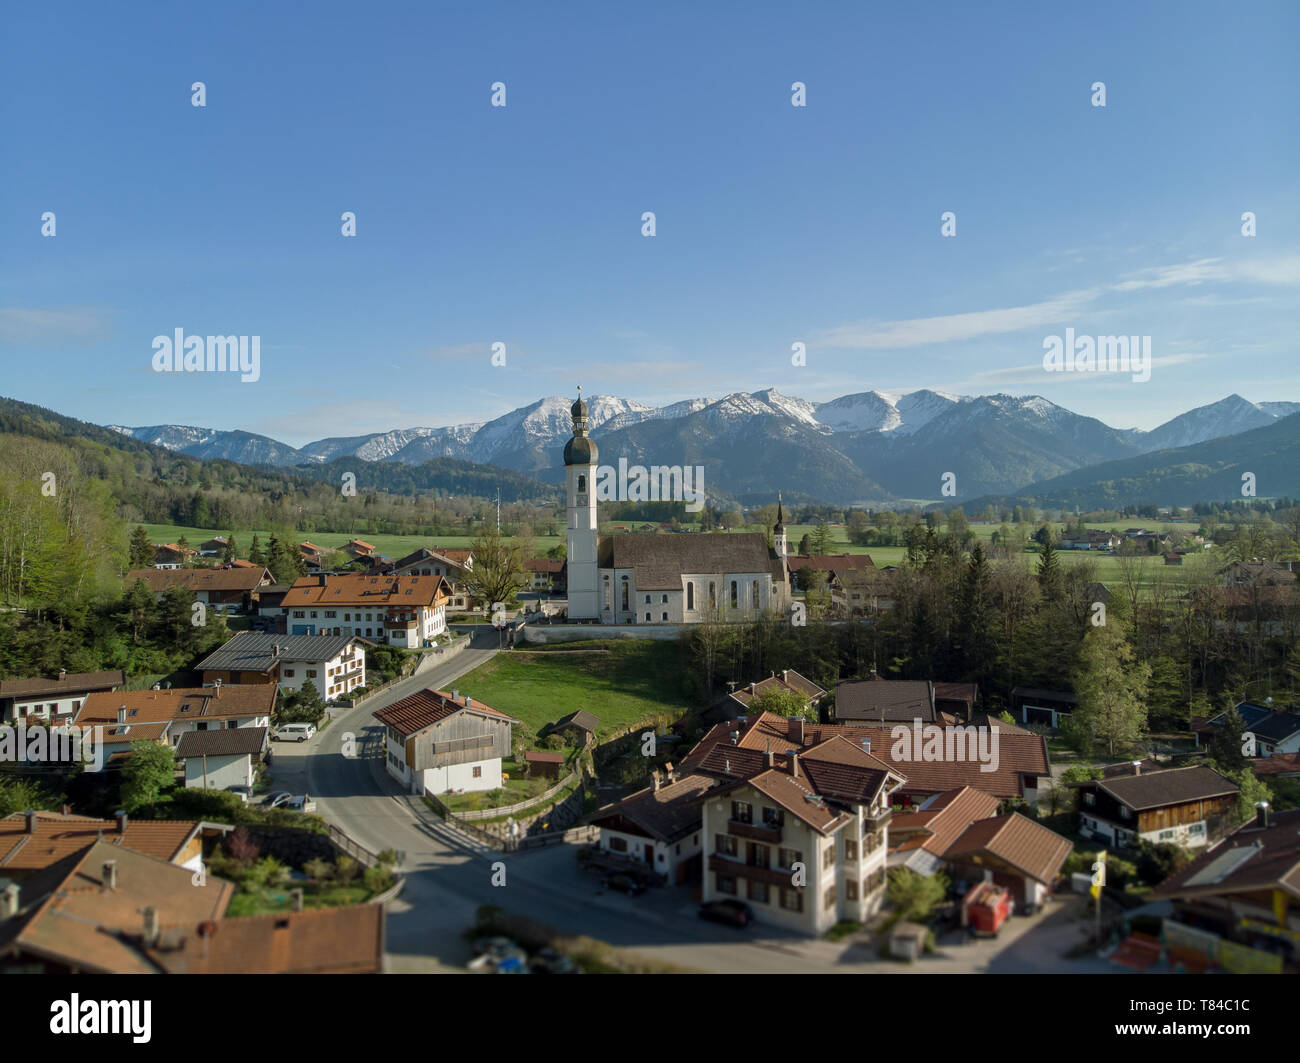 Authentic Bavarian village in beatiful landscape with clear alps in the background and blue sky Stock Photo